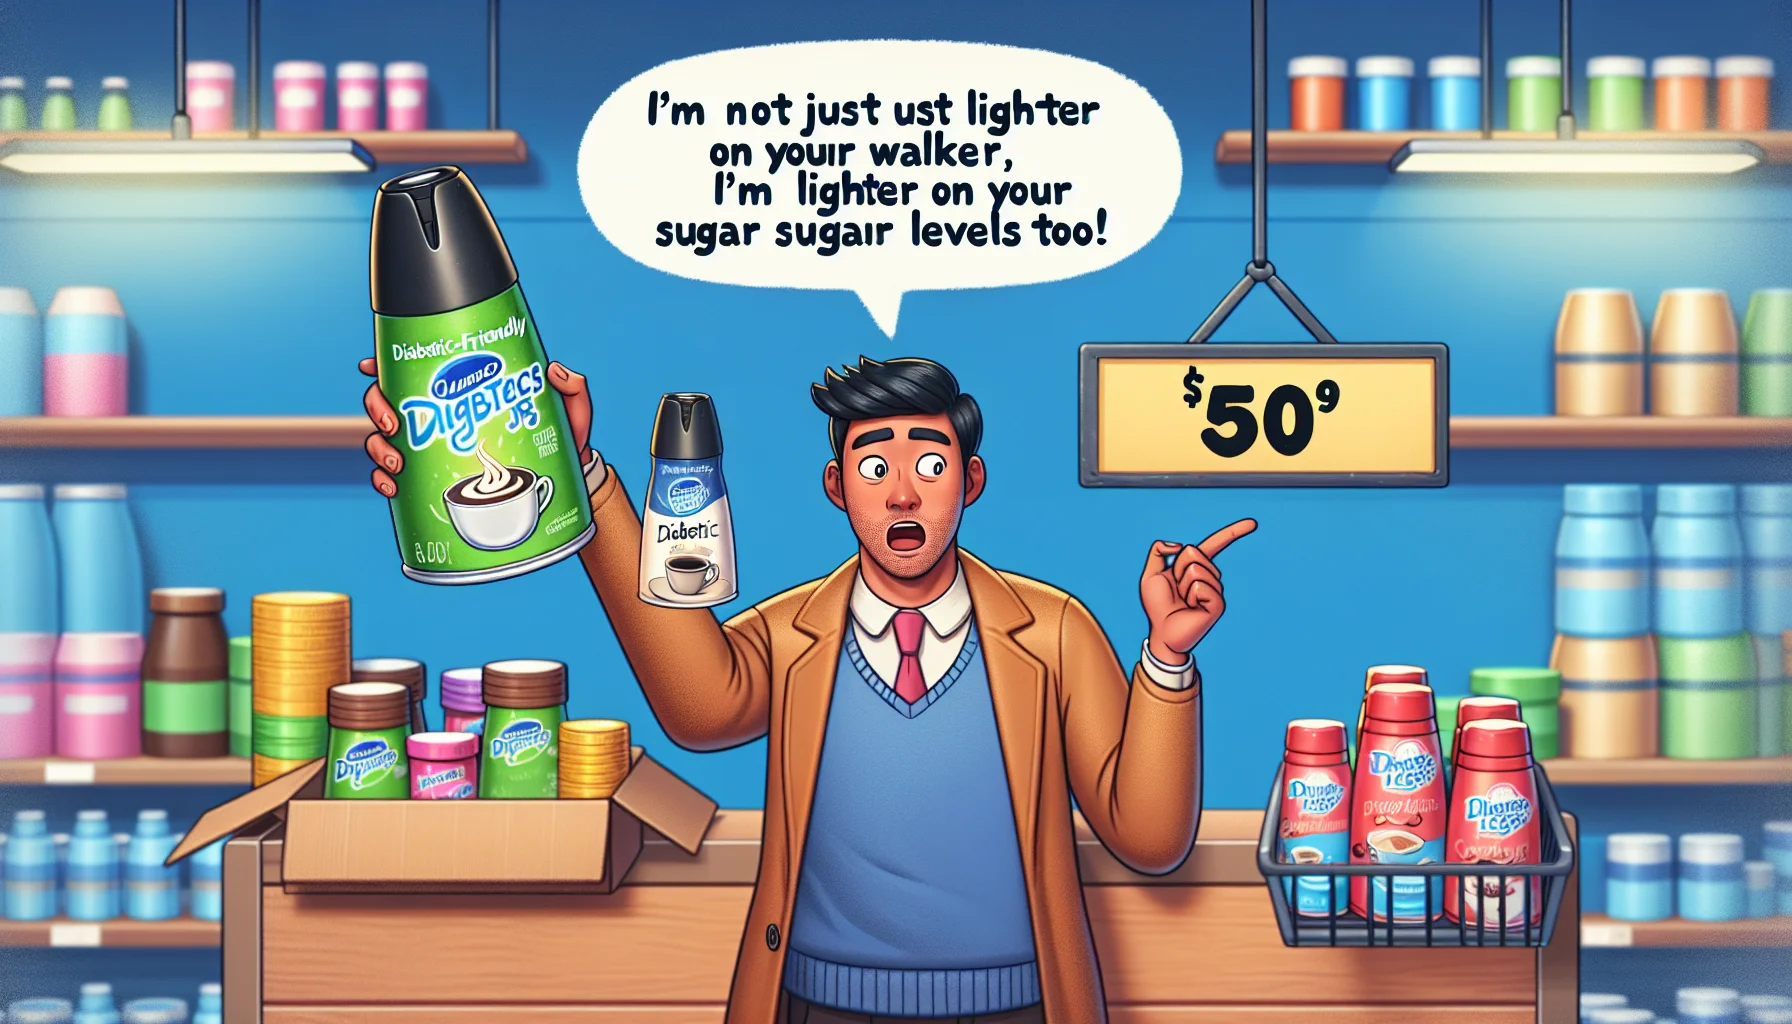 Create a humorous and relatable scene emphasizing the benefits of using a diabetic-friendly coffee creamer. Display a setting where an Asian male grocery shopper with a surprised look is comparing two price tags between a regular creamer and the cheaper diabetic-friendly creamer. Make the diabetic creamer appear healthier and brightly colored, indicating its nutritional superiority. A funny dialogue bubble is coming from the creamer saying something witty such as, 'I'm not just lighter on your wallet, I'm lighter on your sugar levels too!' This fun scenario encourages people to consider their health when budgeting groceries.